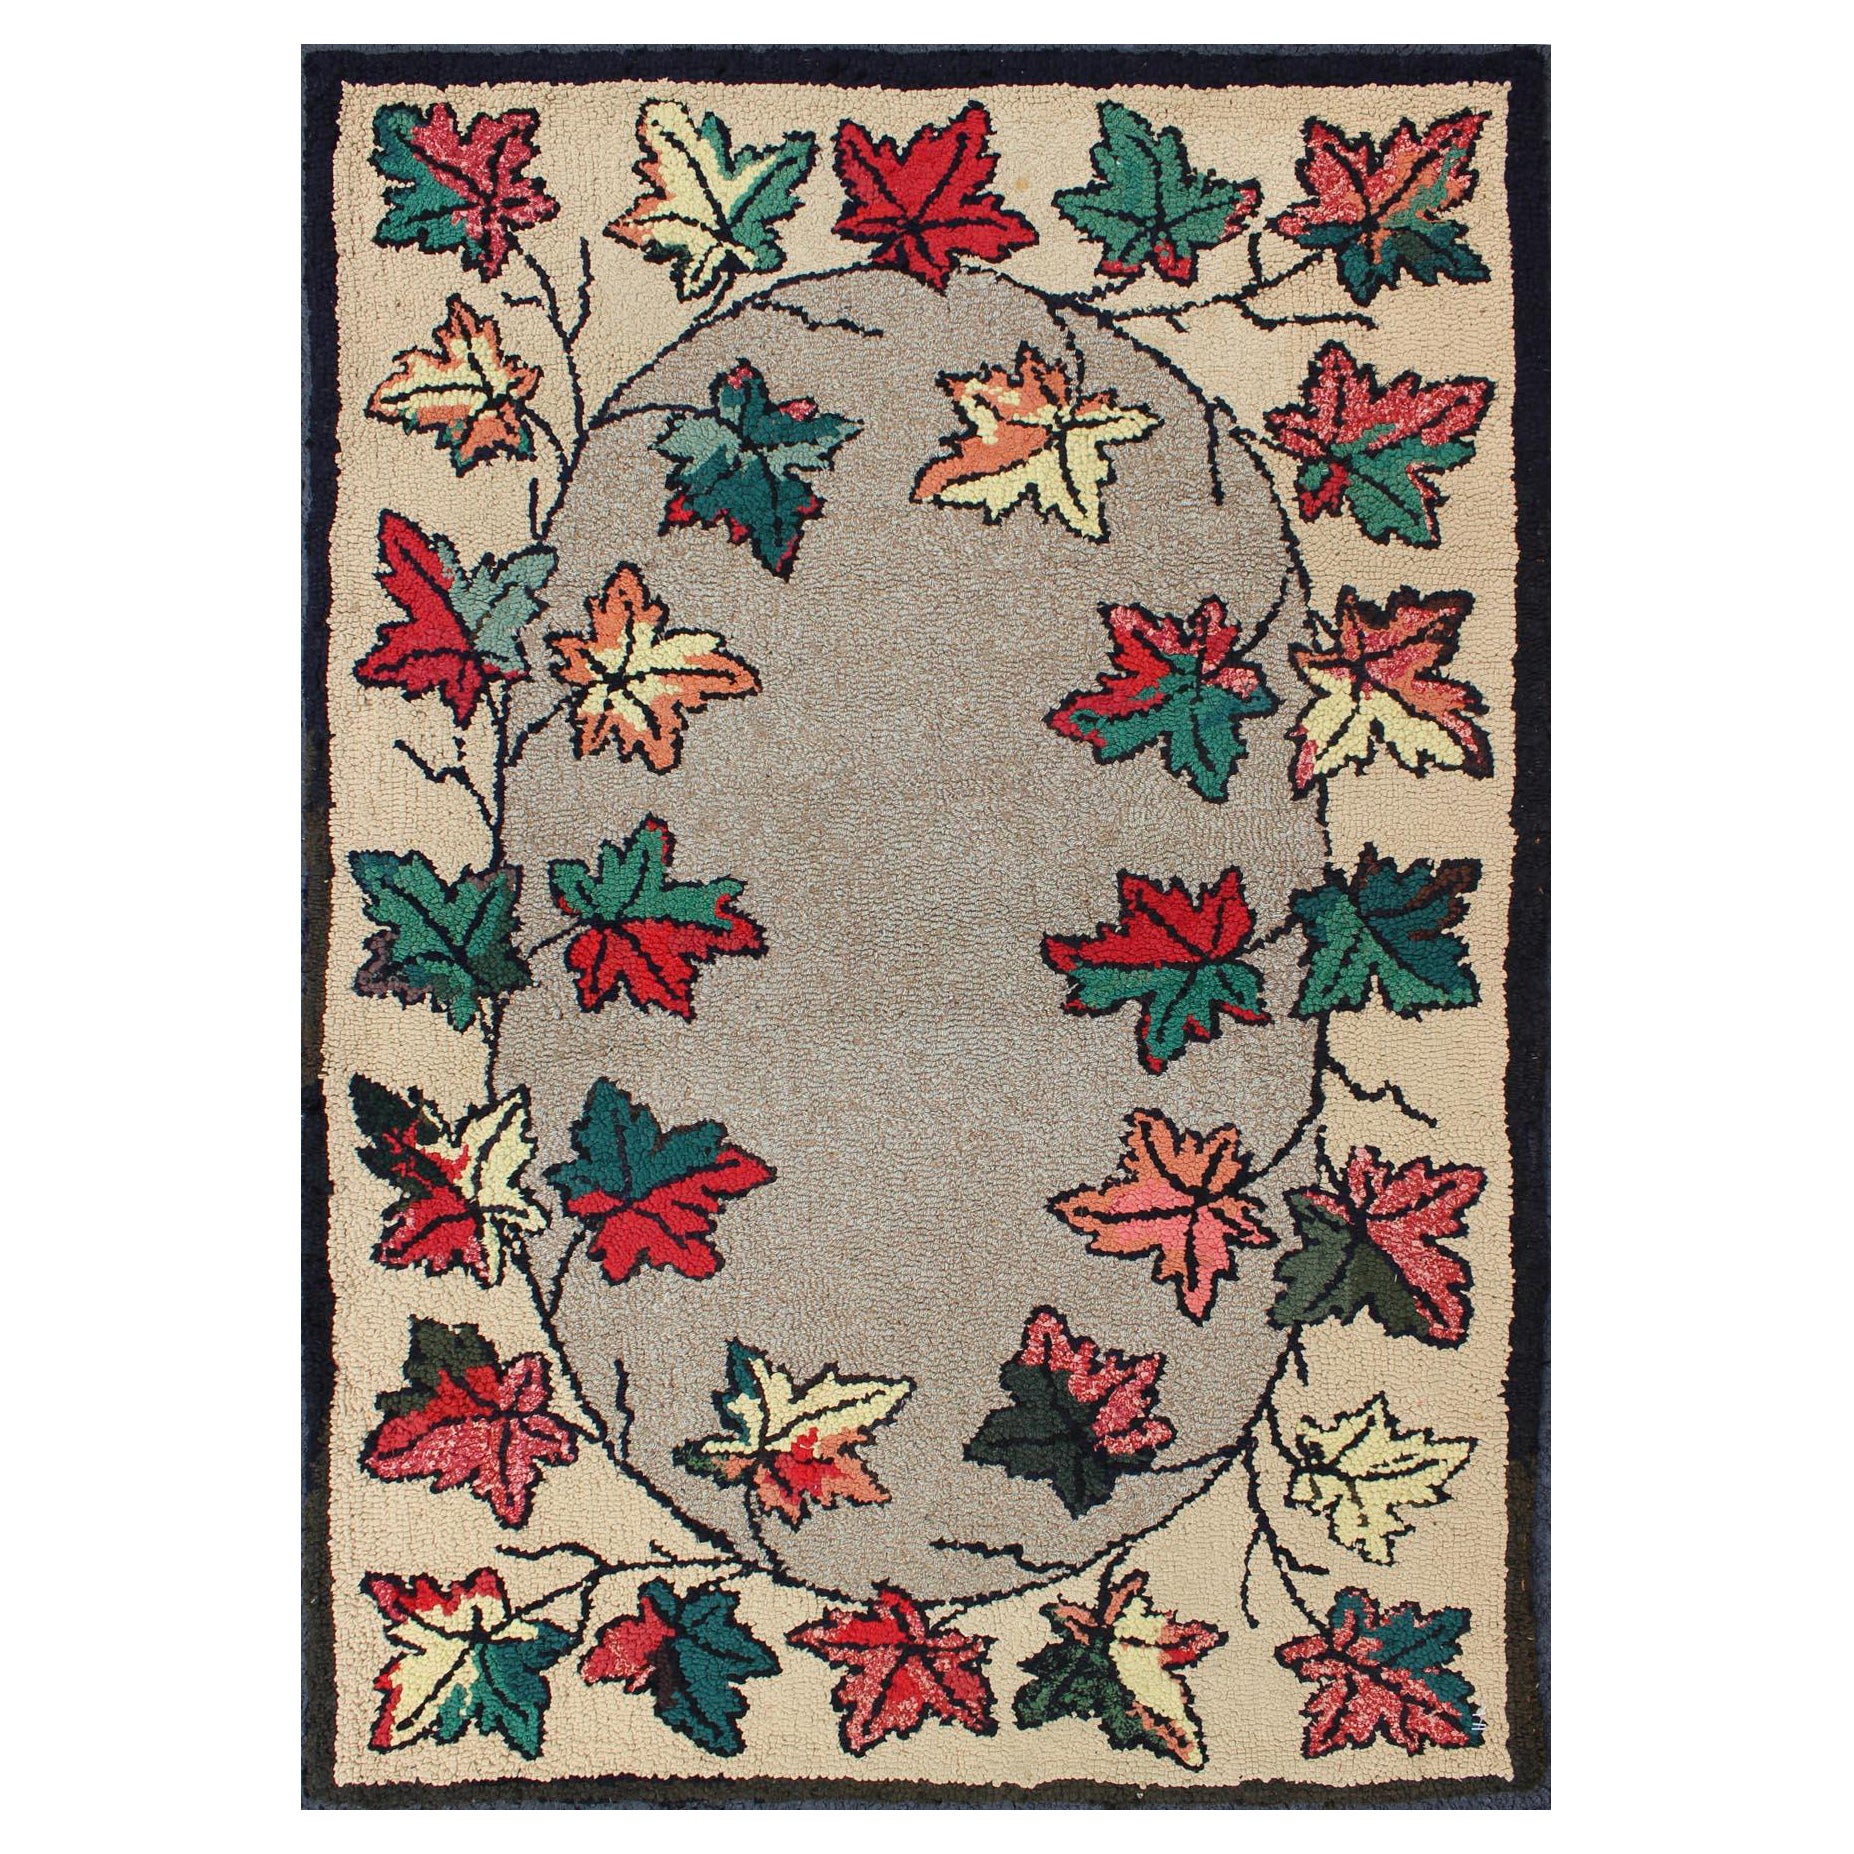 Leaf Design American Hooked Rug in Red, Green, and Charcoal Outlines For Sale